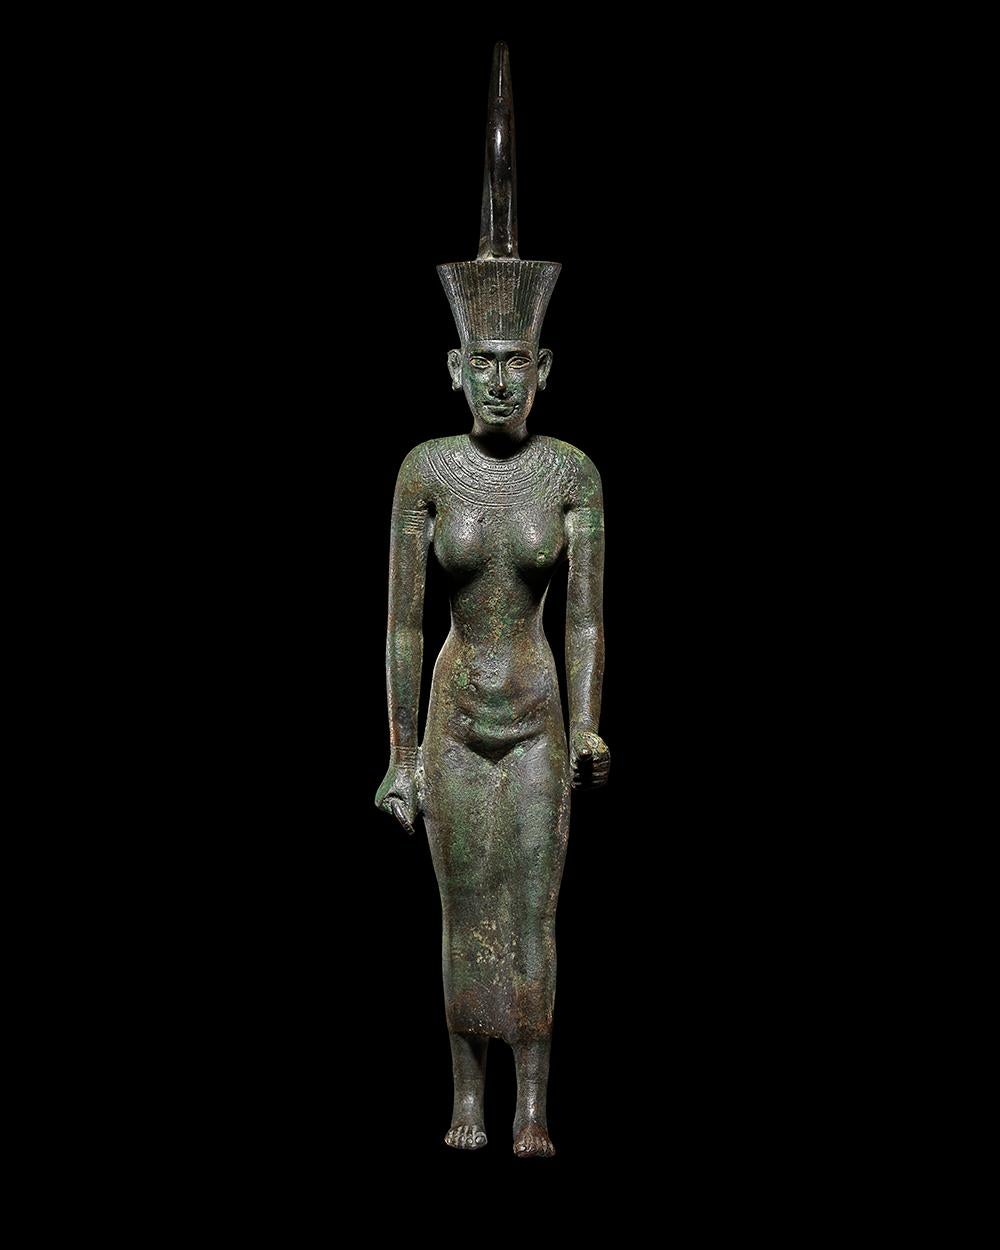 Bronze statue of the goddess Neith, striding, her left foot extended forward. Her left hand is extended forward and formally held a papyrus sceptre, a fragmentary ankh is visible in her right hand. She wears a close-fitting sheath dress, incised